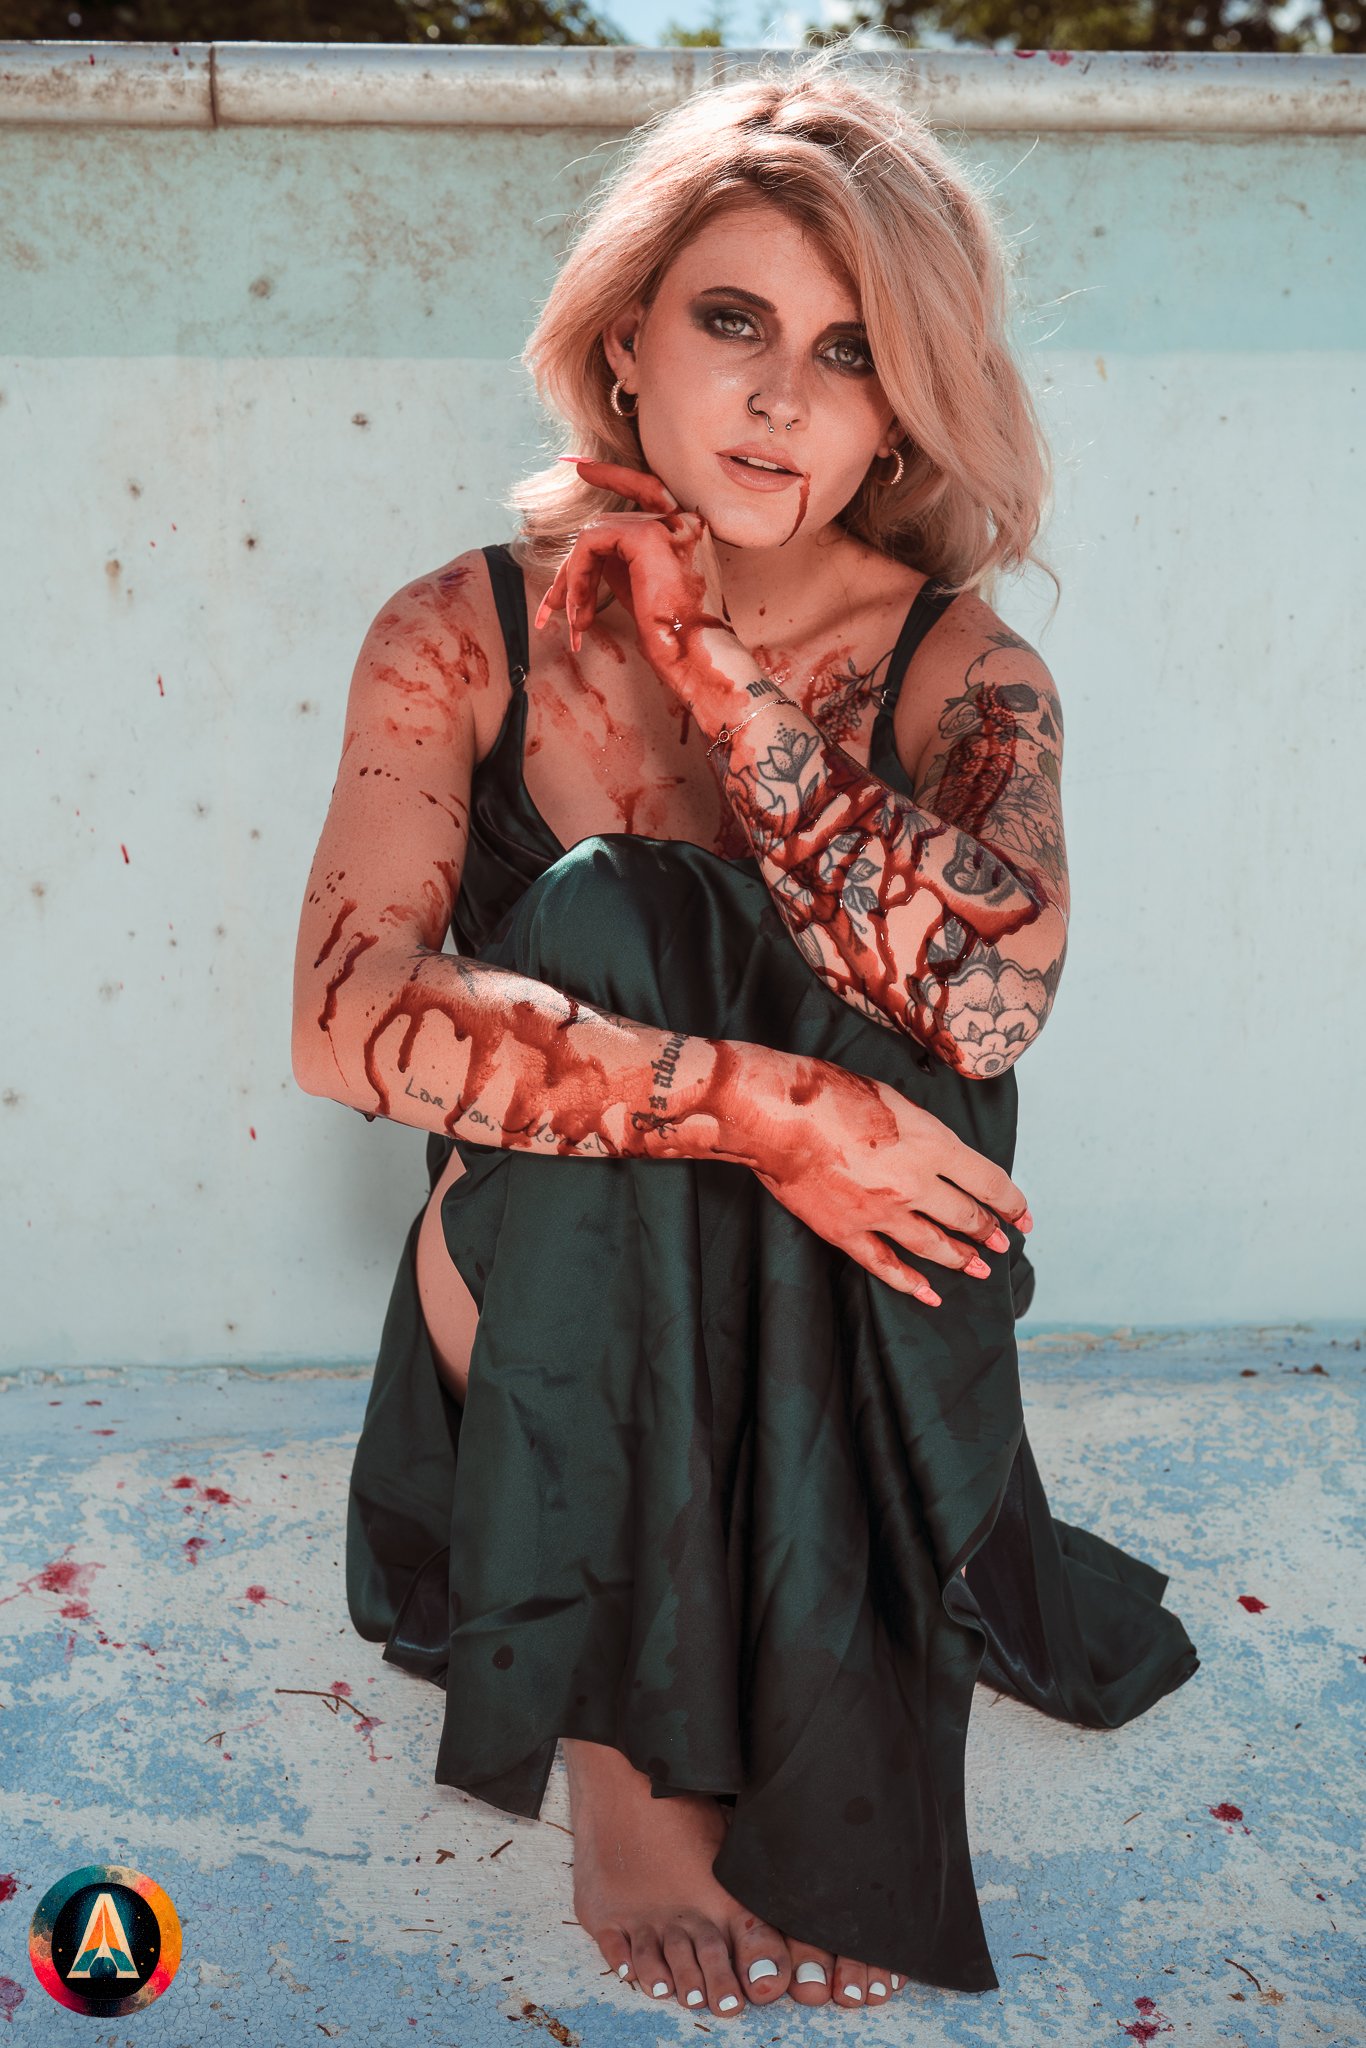 Blonde model courtney france poses in the haunted indiana state sanitarium pool in a elegant black / green dress covered in fake blood.